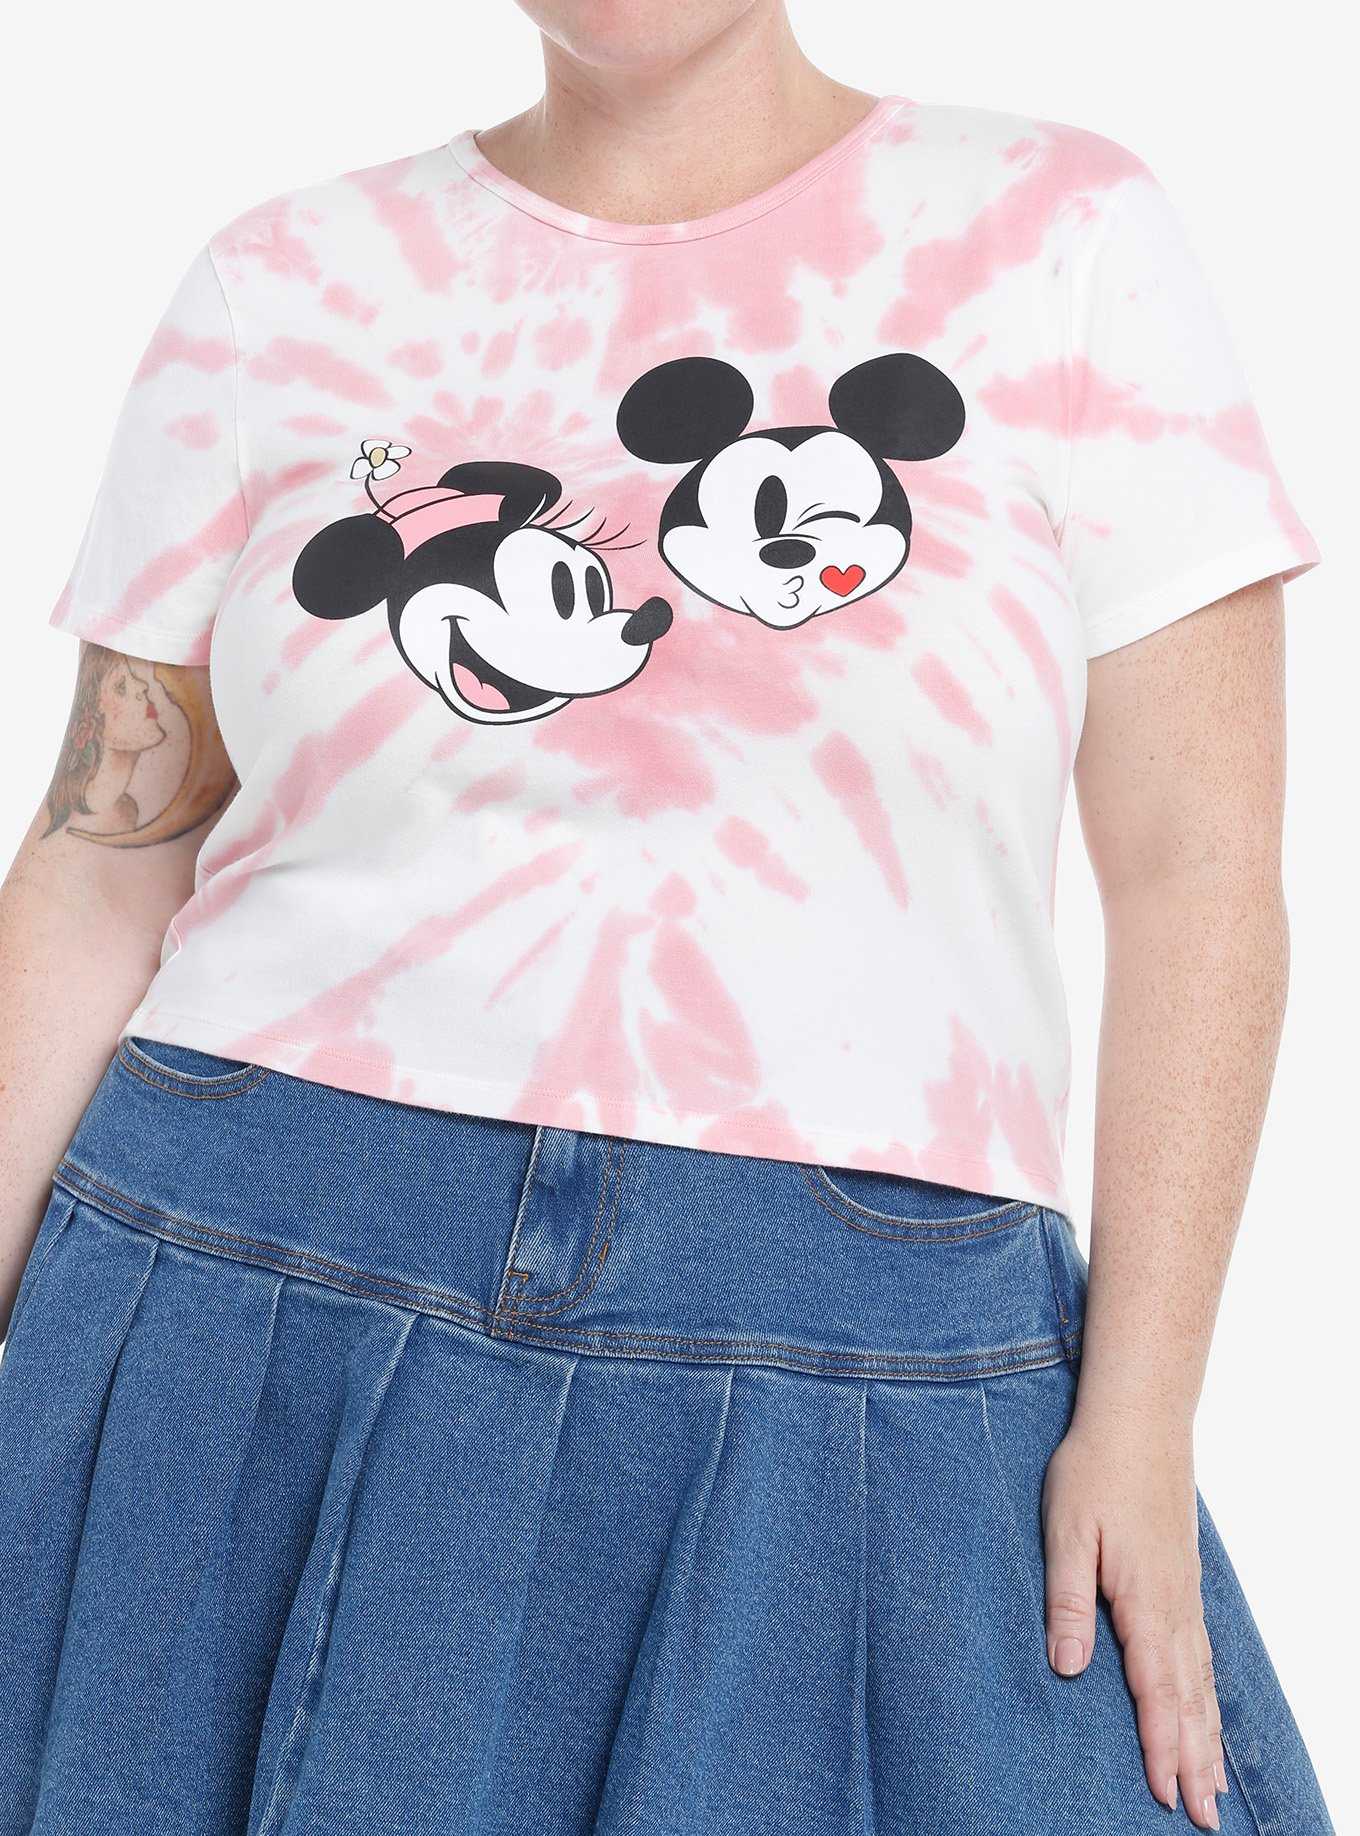 Her Universe Disney Mickey Mouse & Minnie Mouse Kiss Tie-Dye Crop Girls T-Shirt Plus Size, , hi-res